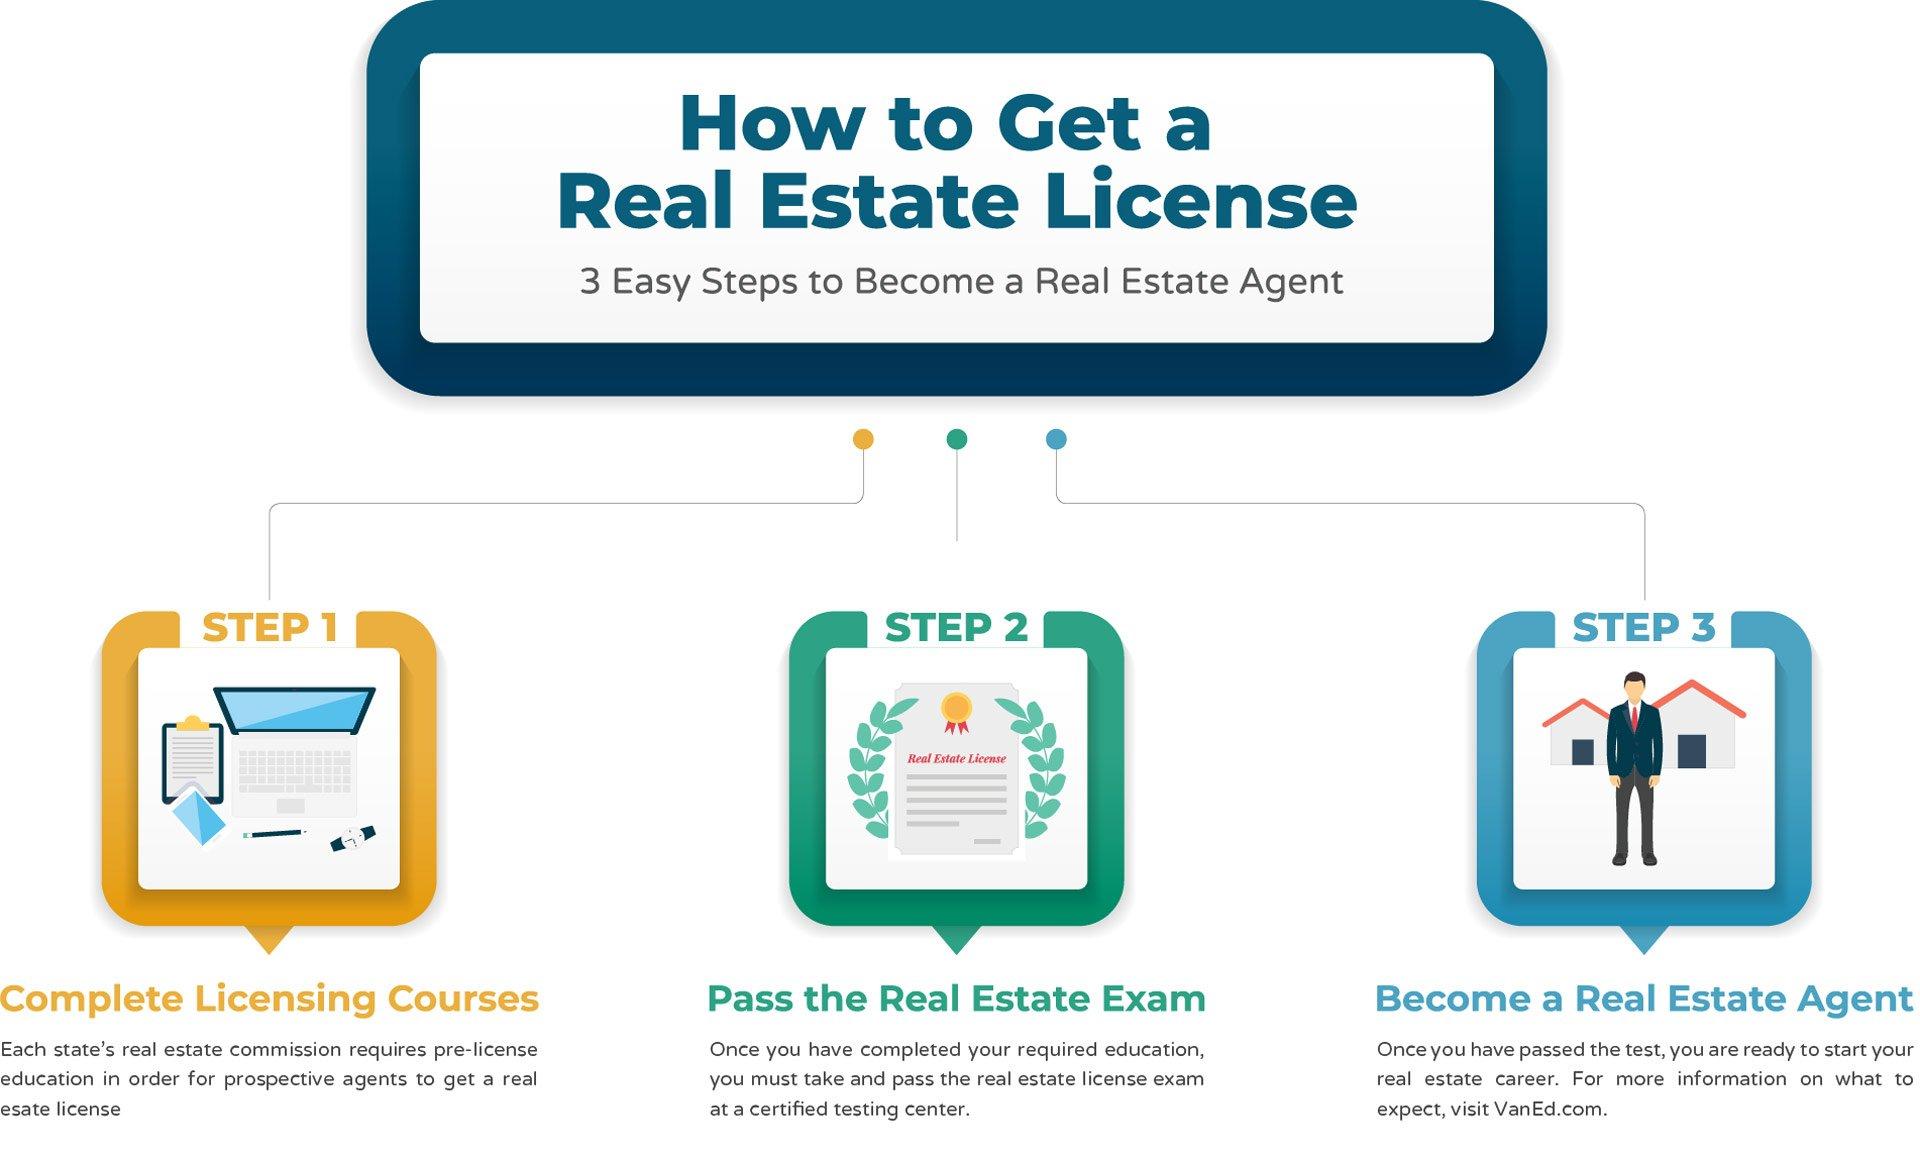 How to apply for a real estate license